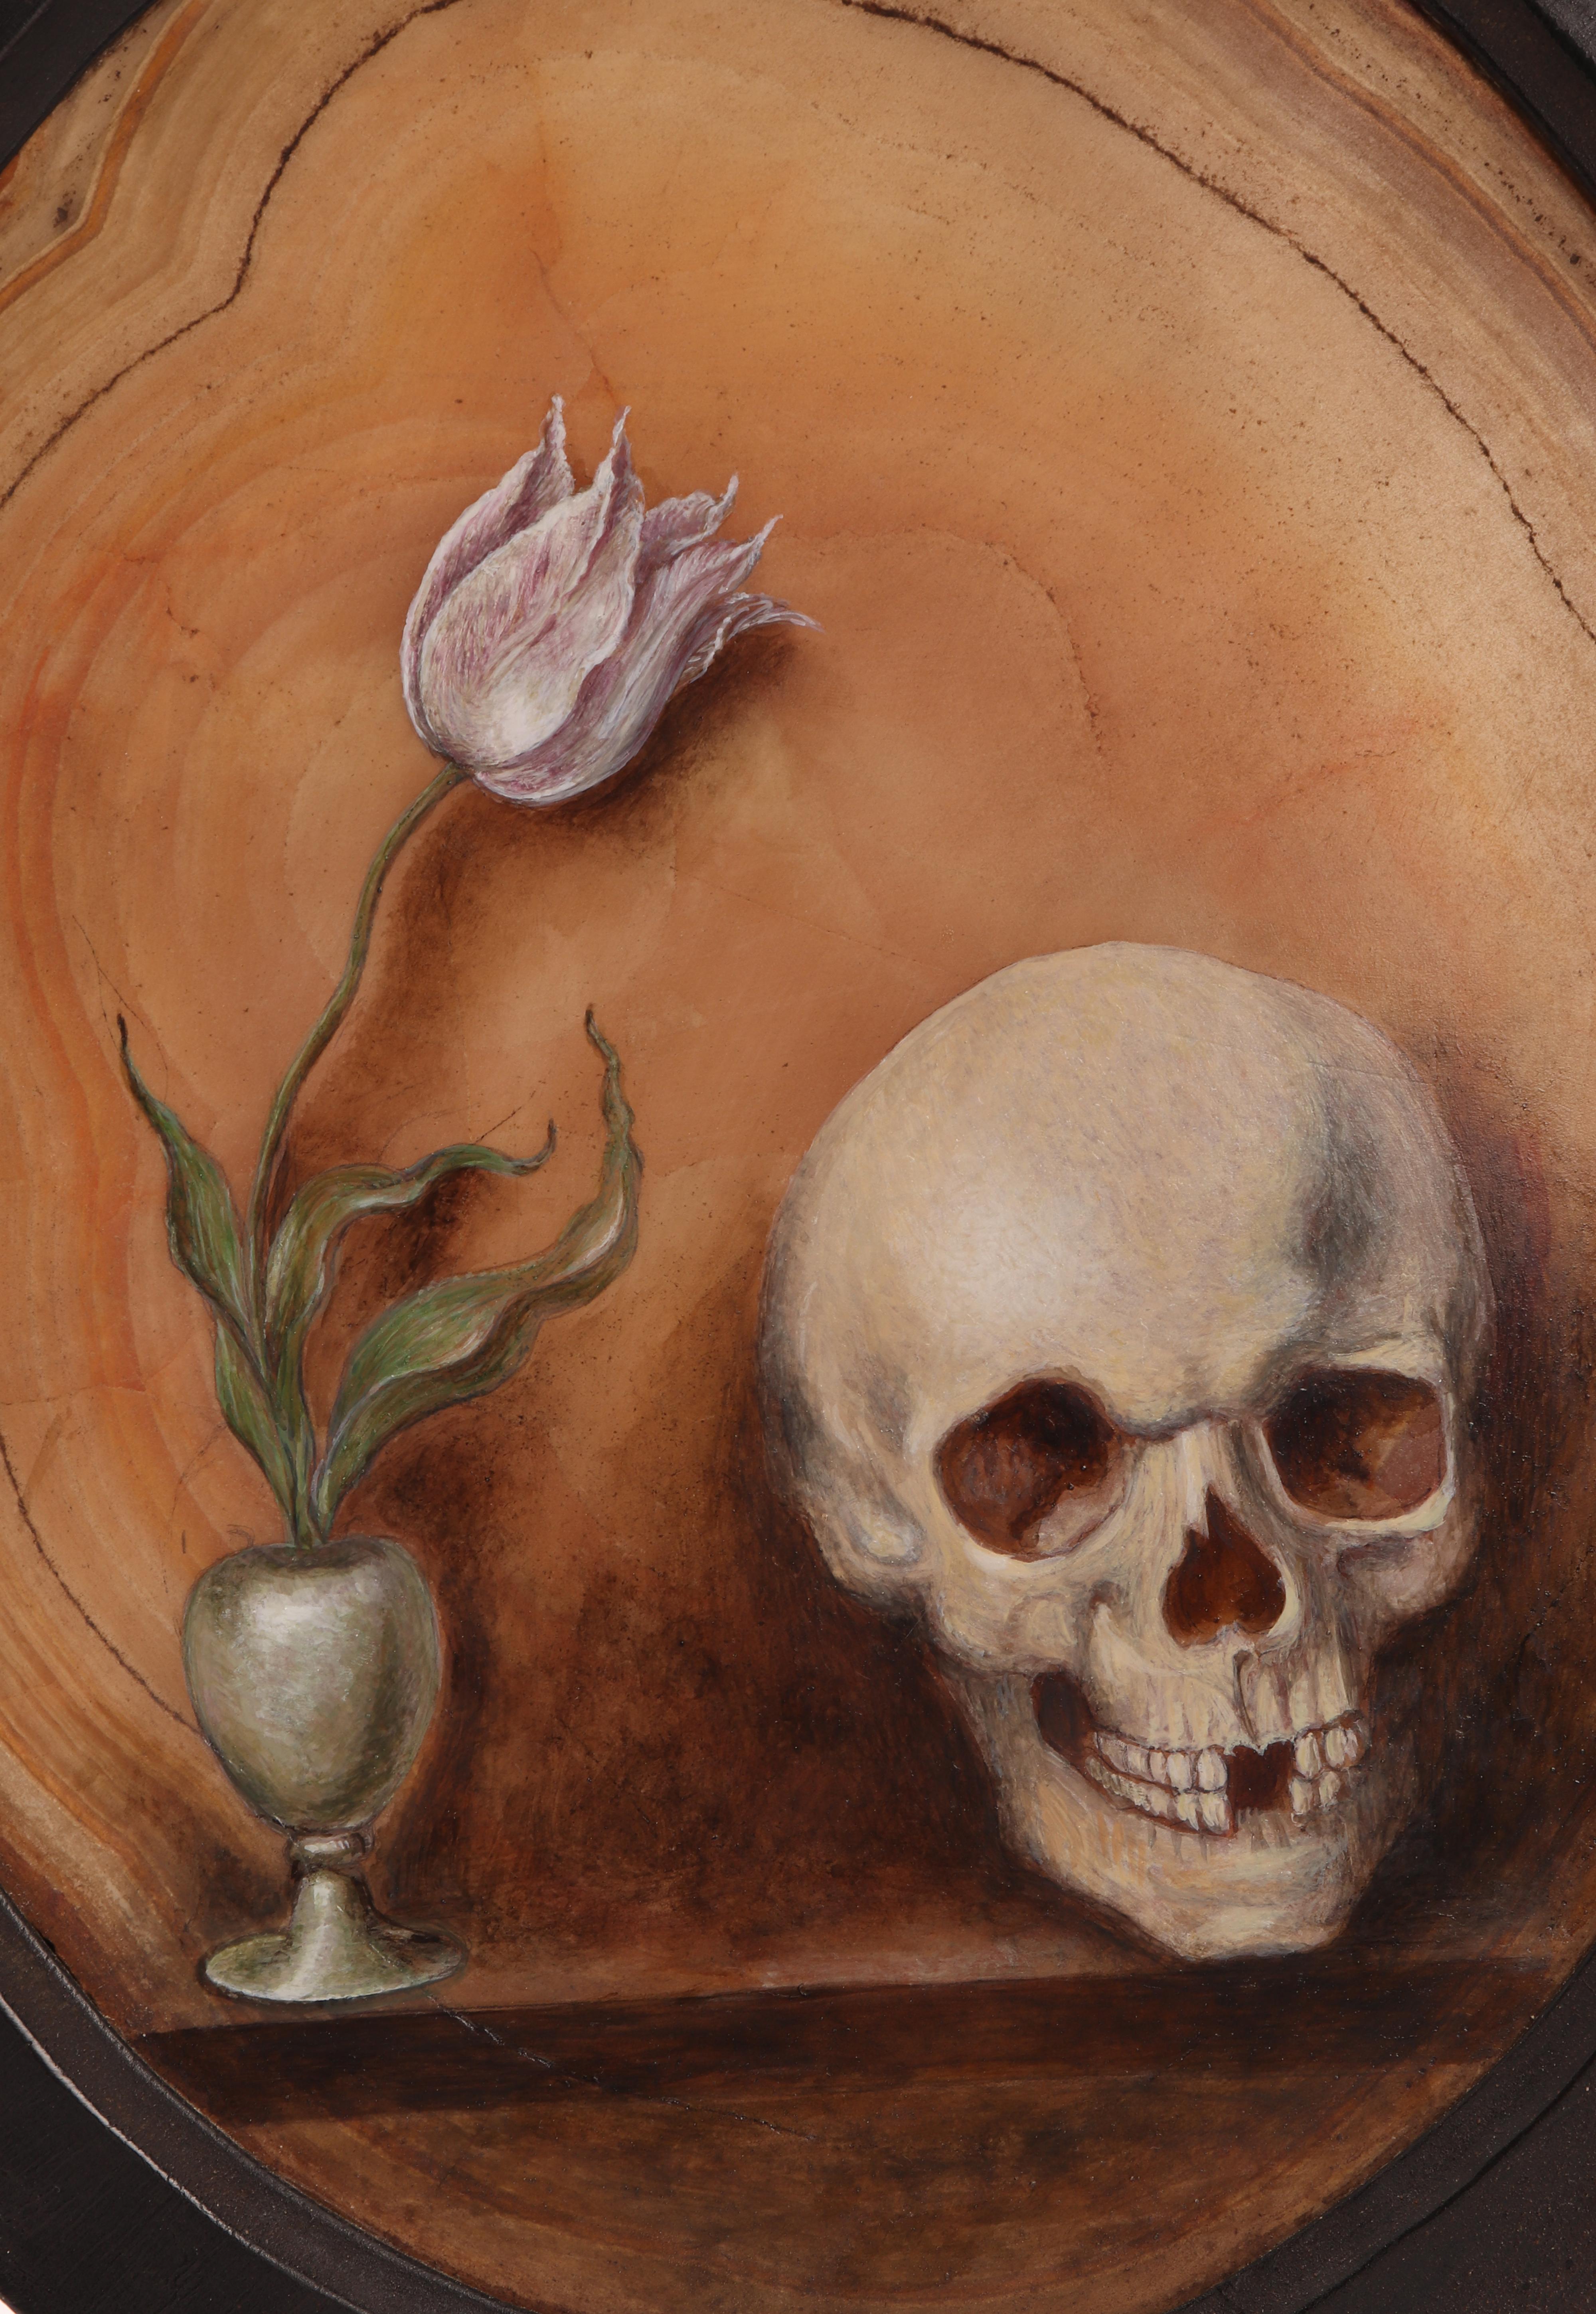 Memento Mori for Wunderkammer, depicting a skull and a tulip, oil paintings on hard stone. A large specimen of oval-shaped natural agate, with a black wooden frame, is mounted on a base of the same wood with an agate inlay. A bronze candle holder is